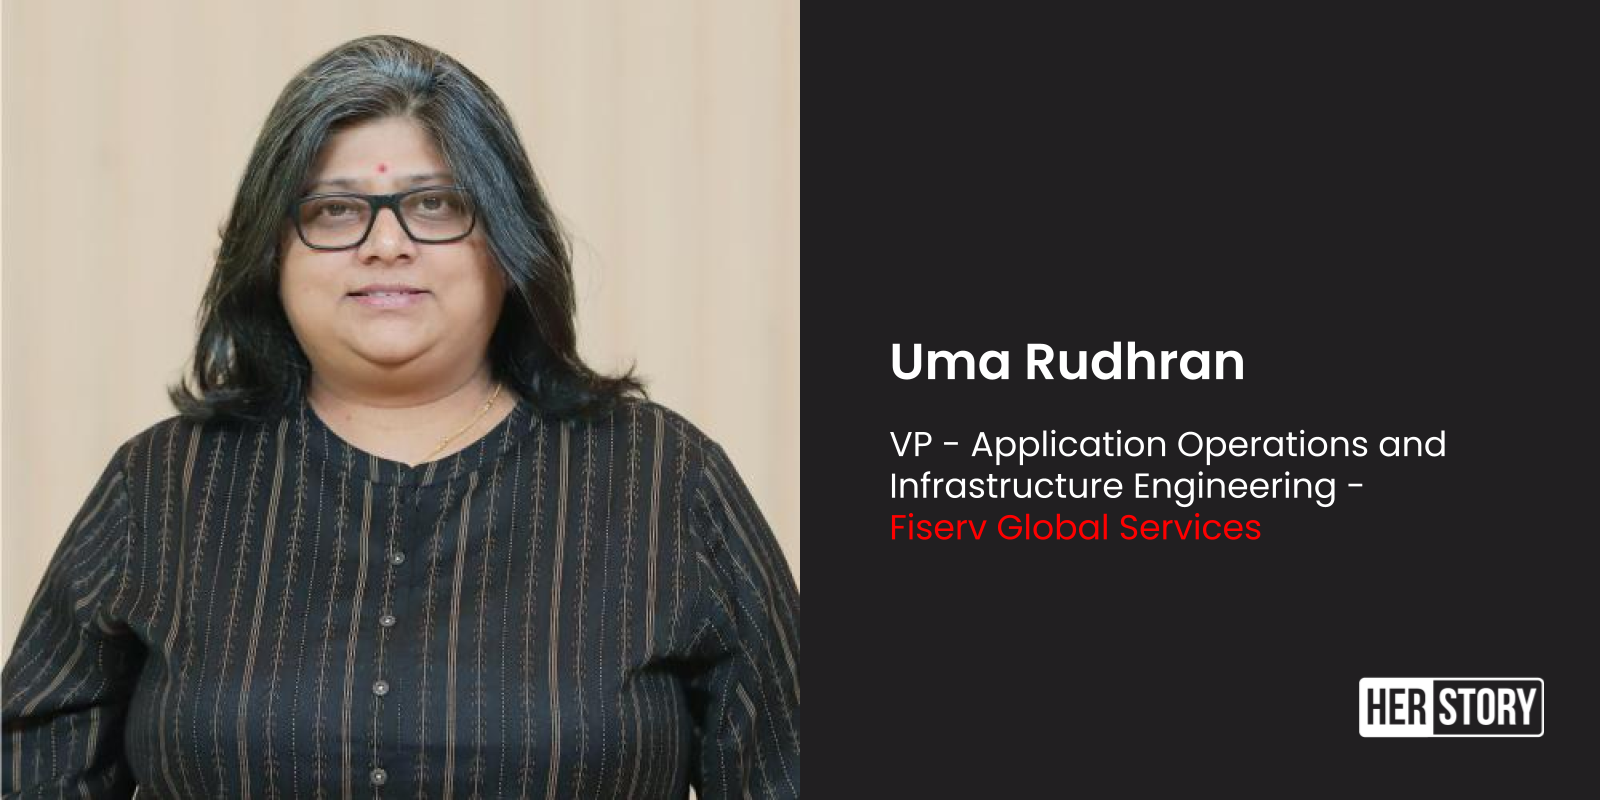 [Women in Tech] The need is to raise awareness and make the learning process more engaging, says Uma Rudhran of Fiserv